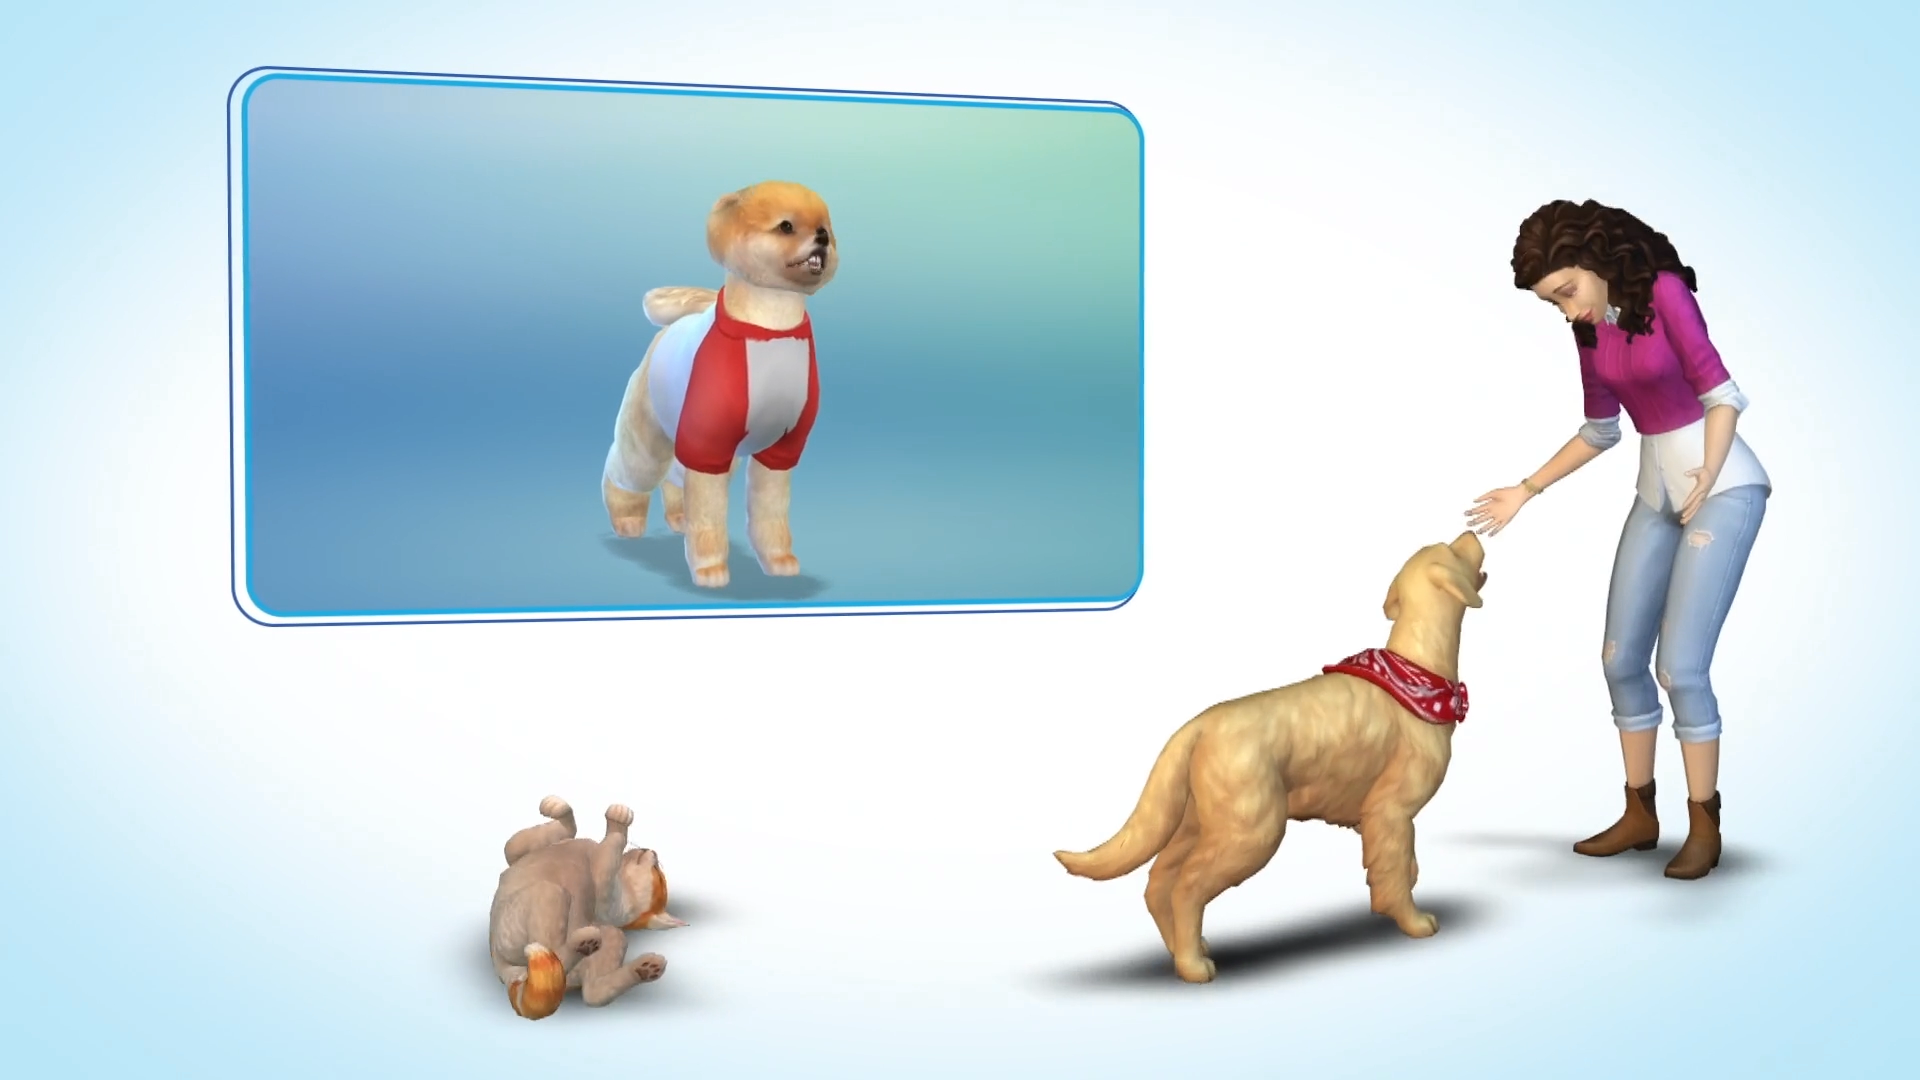 sims 4 cats and dogs pc download free